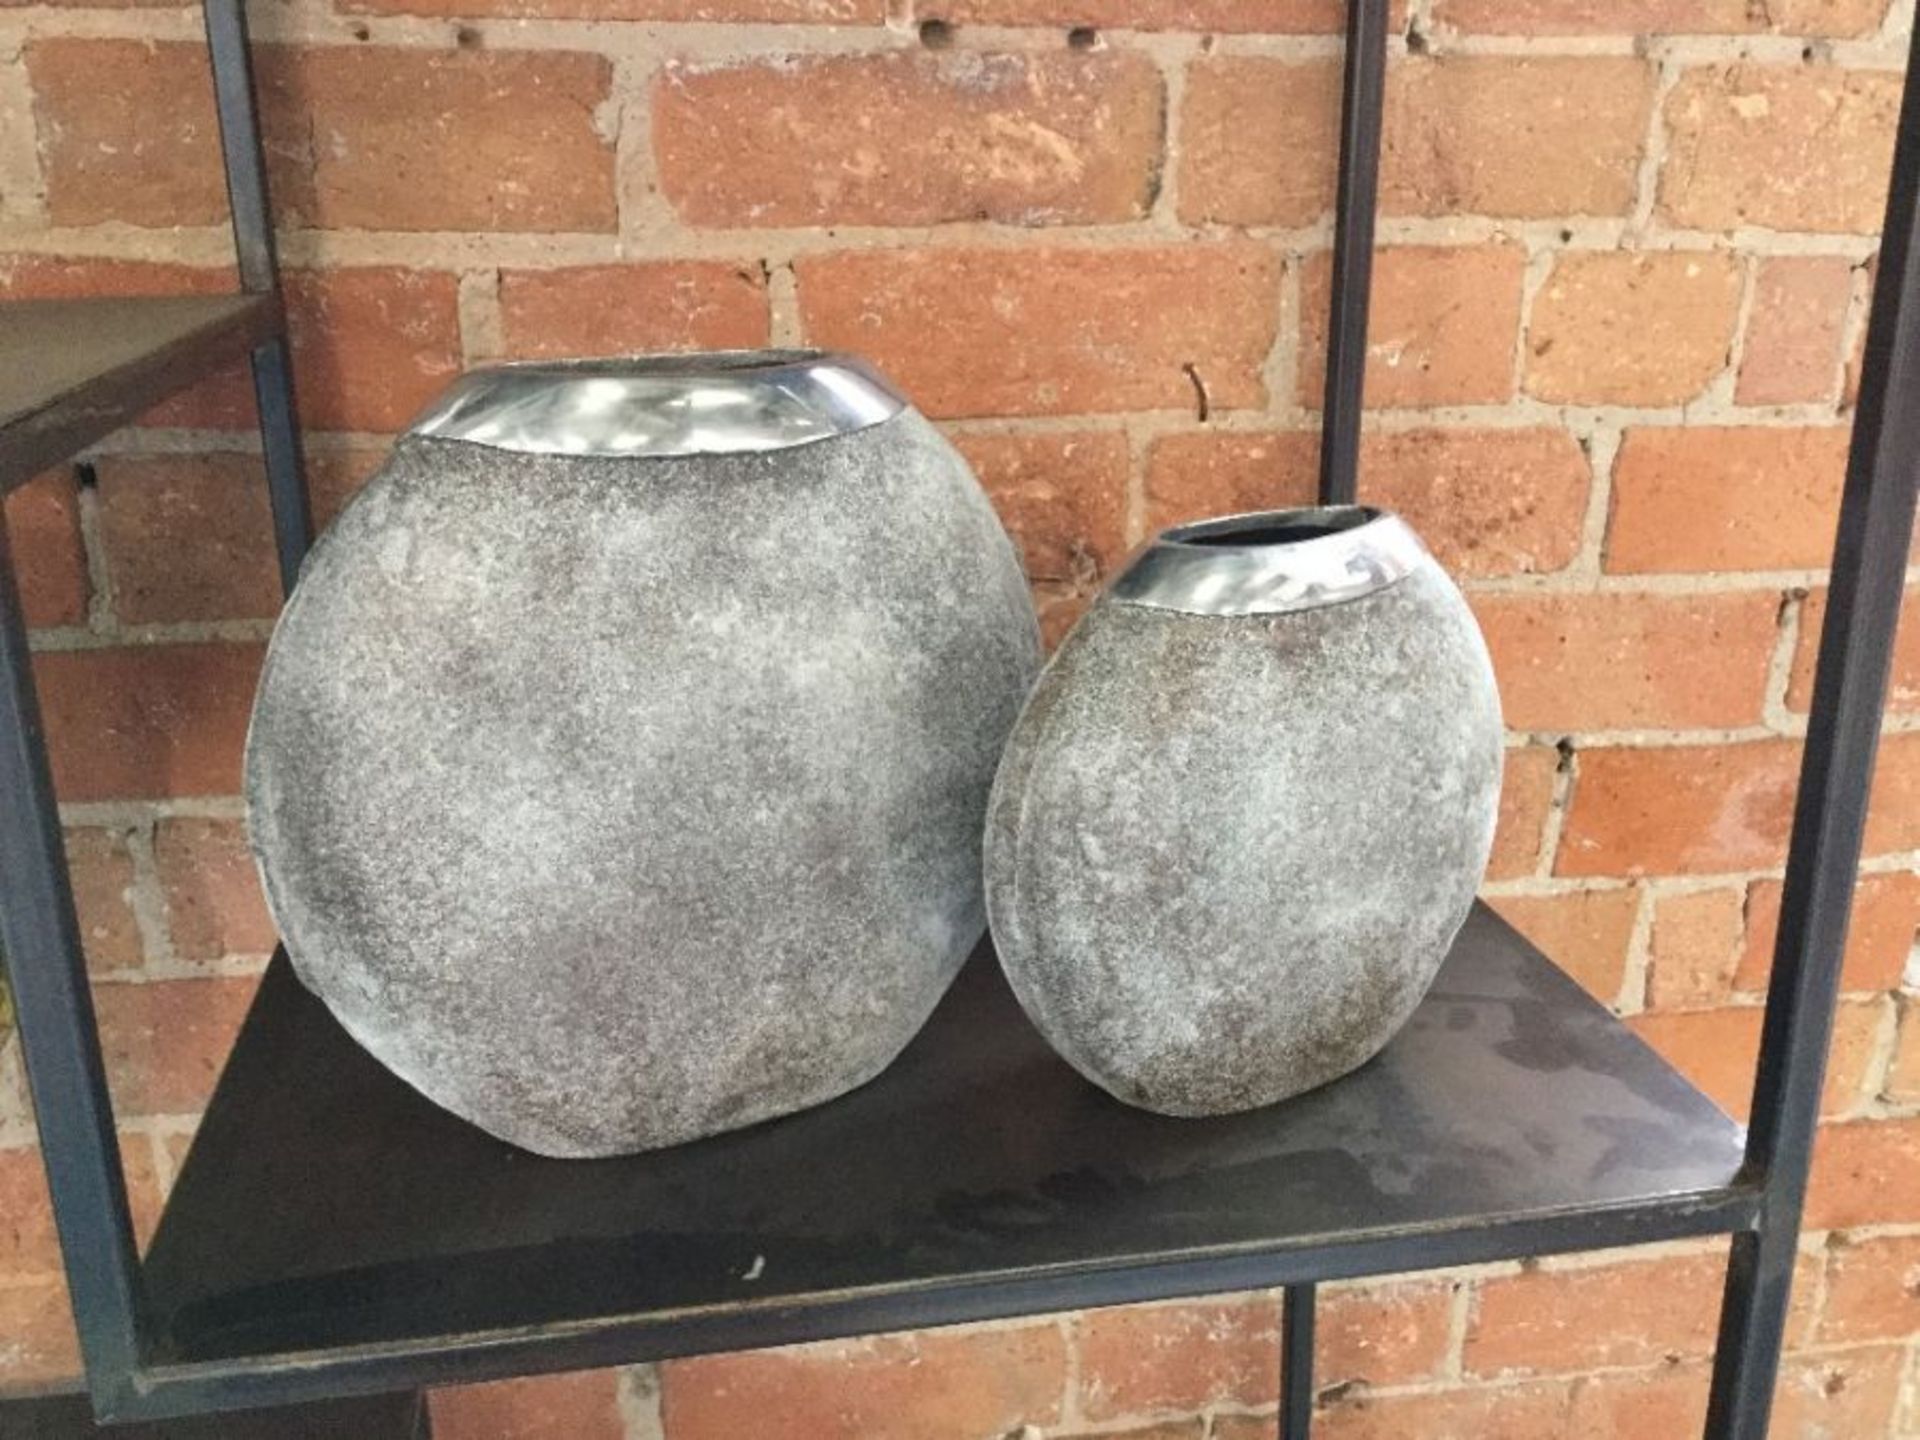 CONCRETE TEXUTURED LARGE AND SMALL VASES